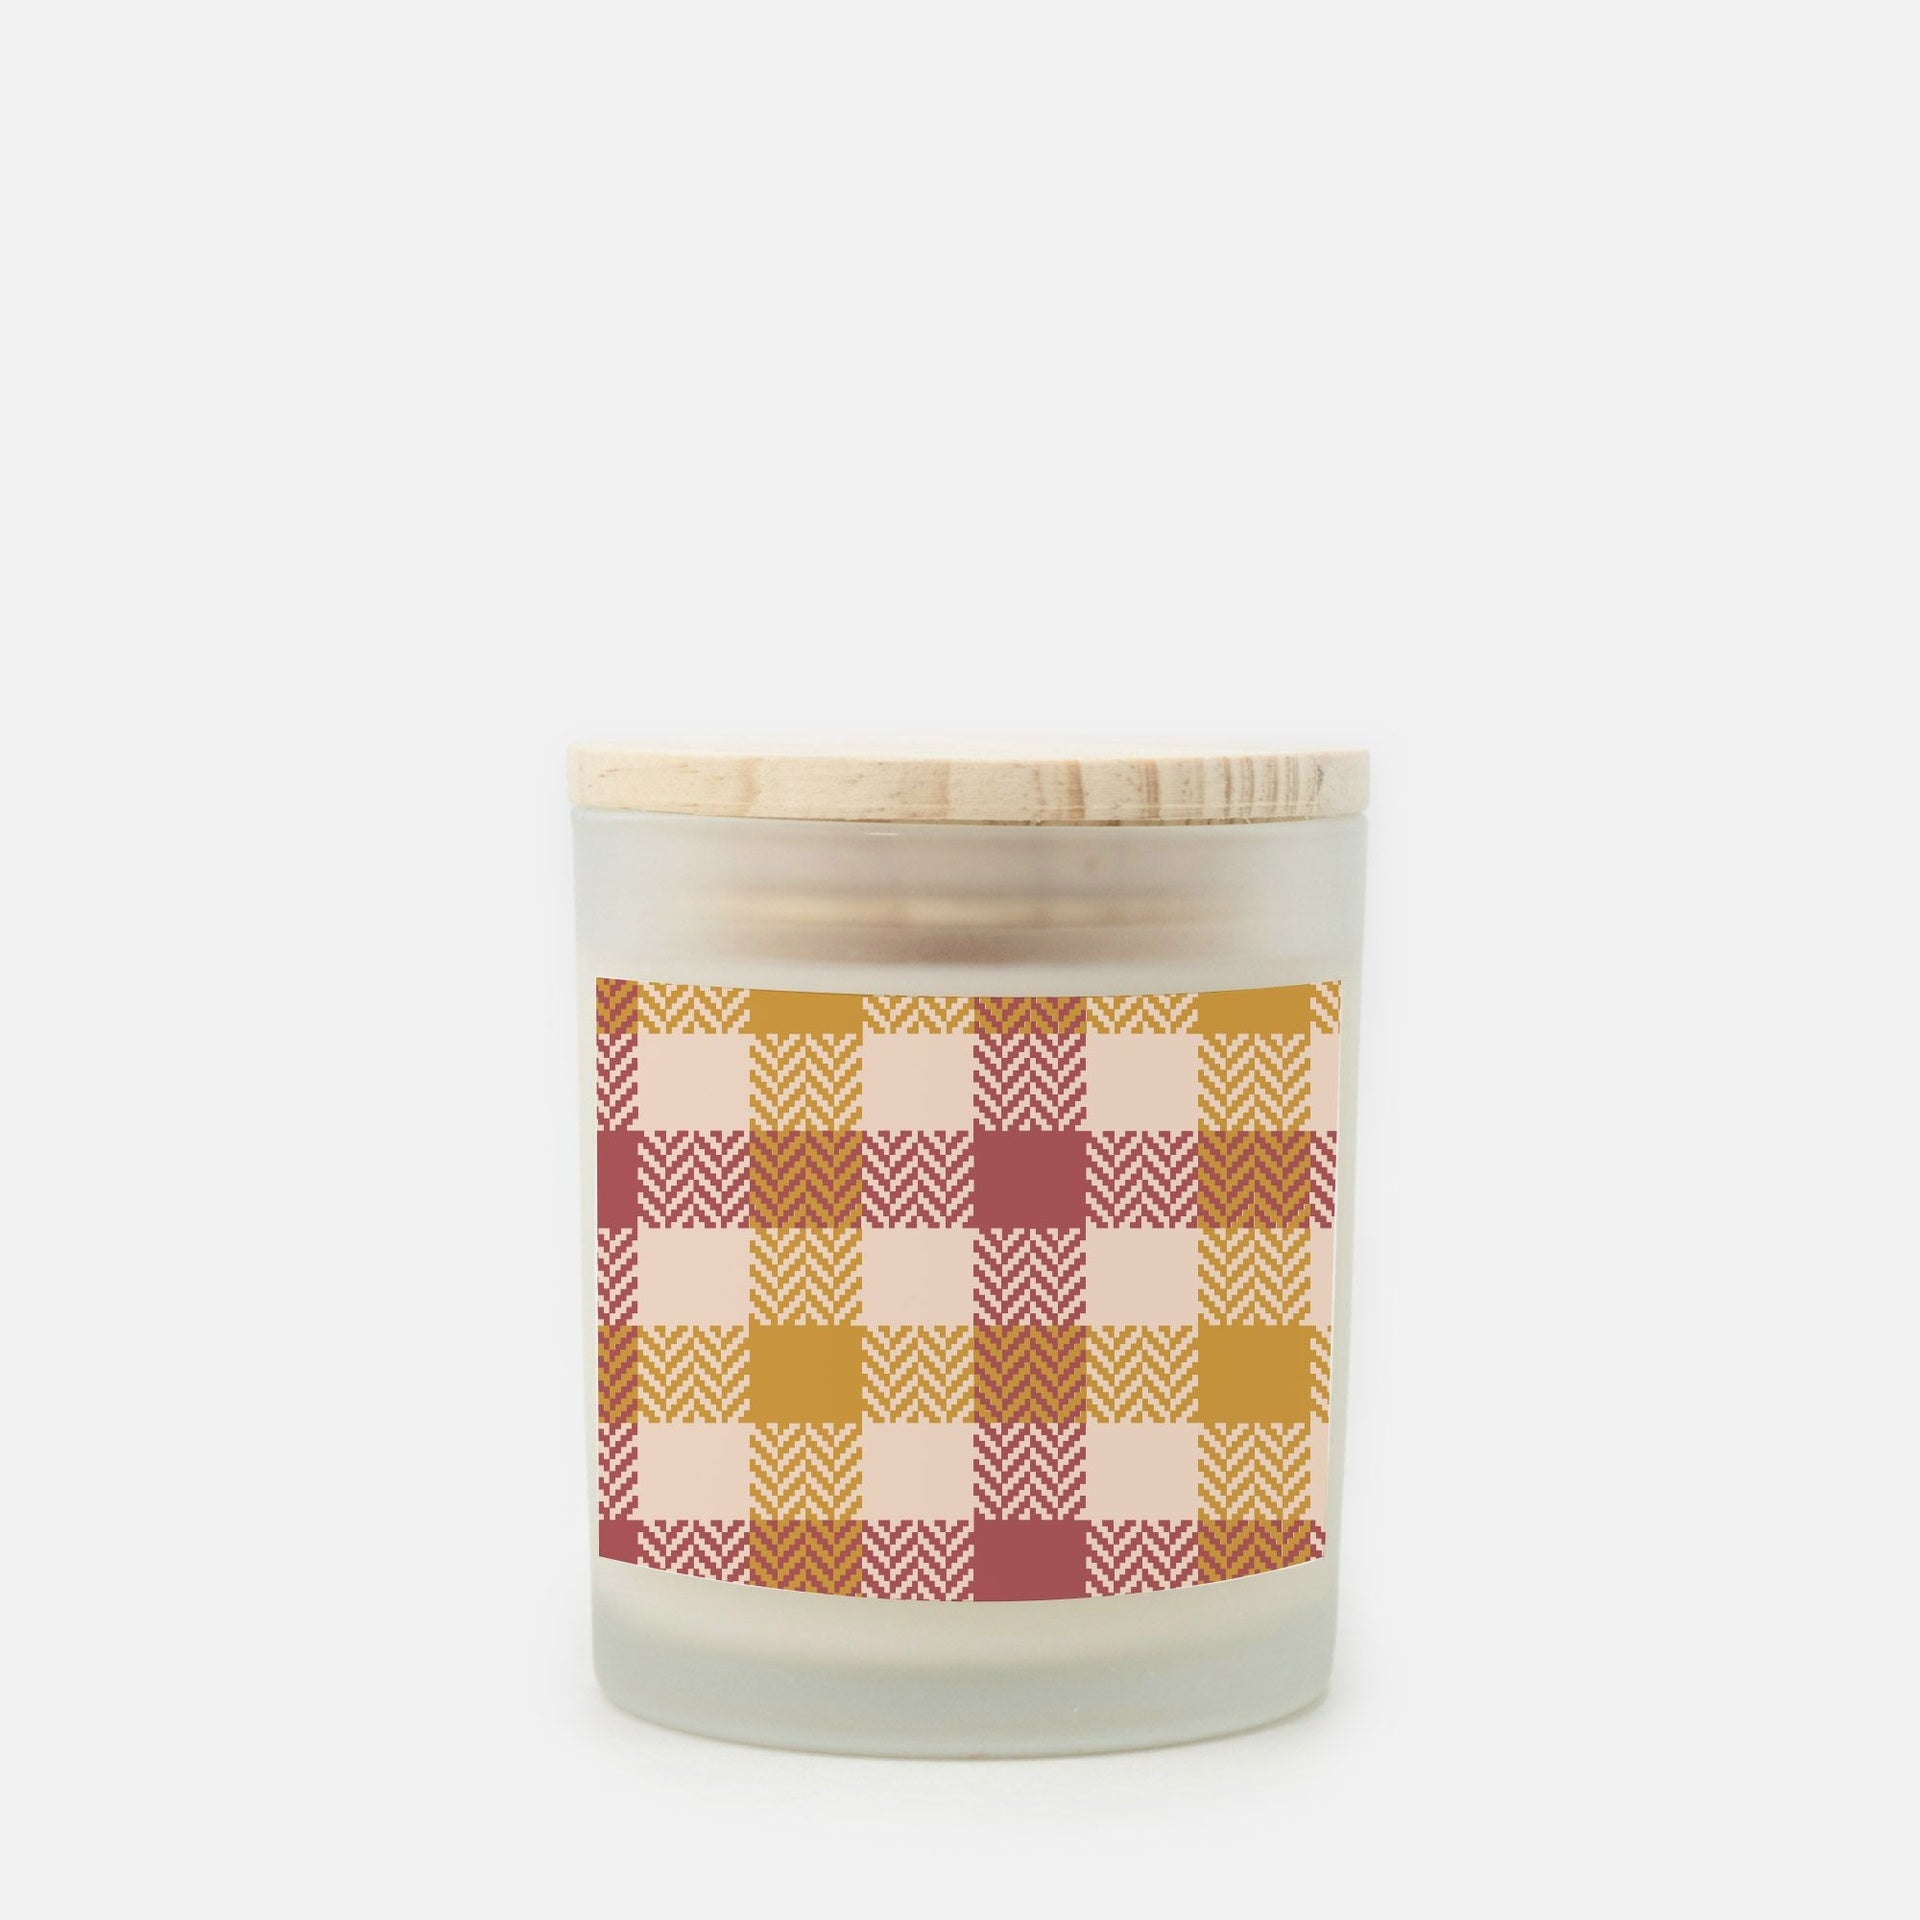 Lifestyle Details - 11oz Red & Orange Plaid Frosted Glass Candle - Cashmere Vanilla